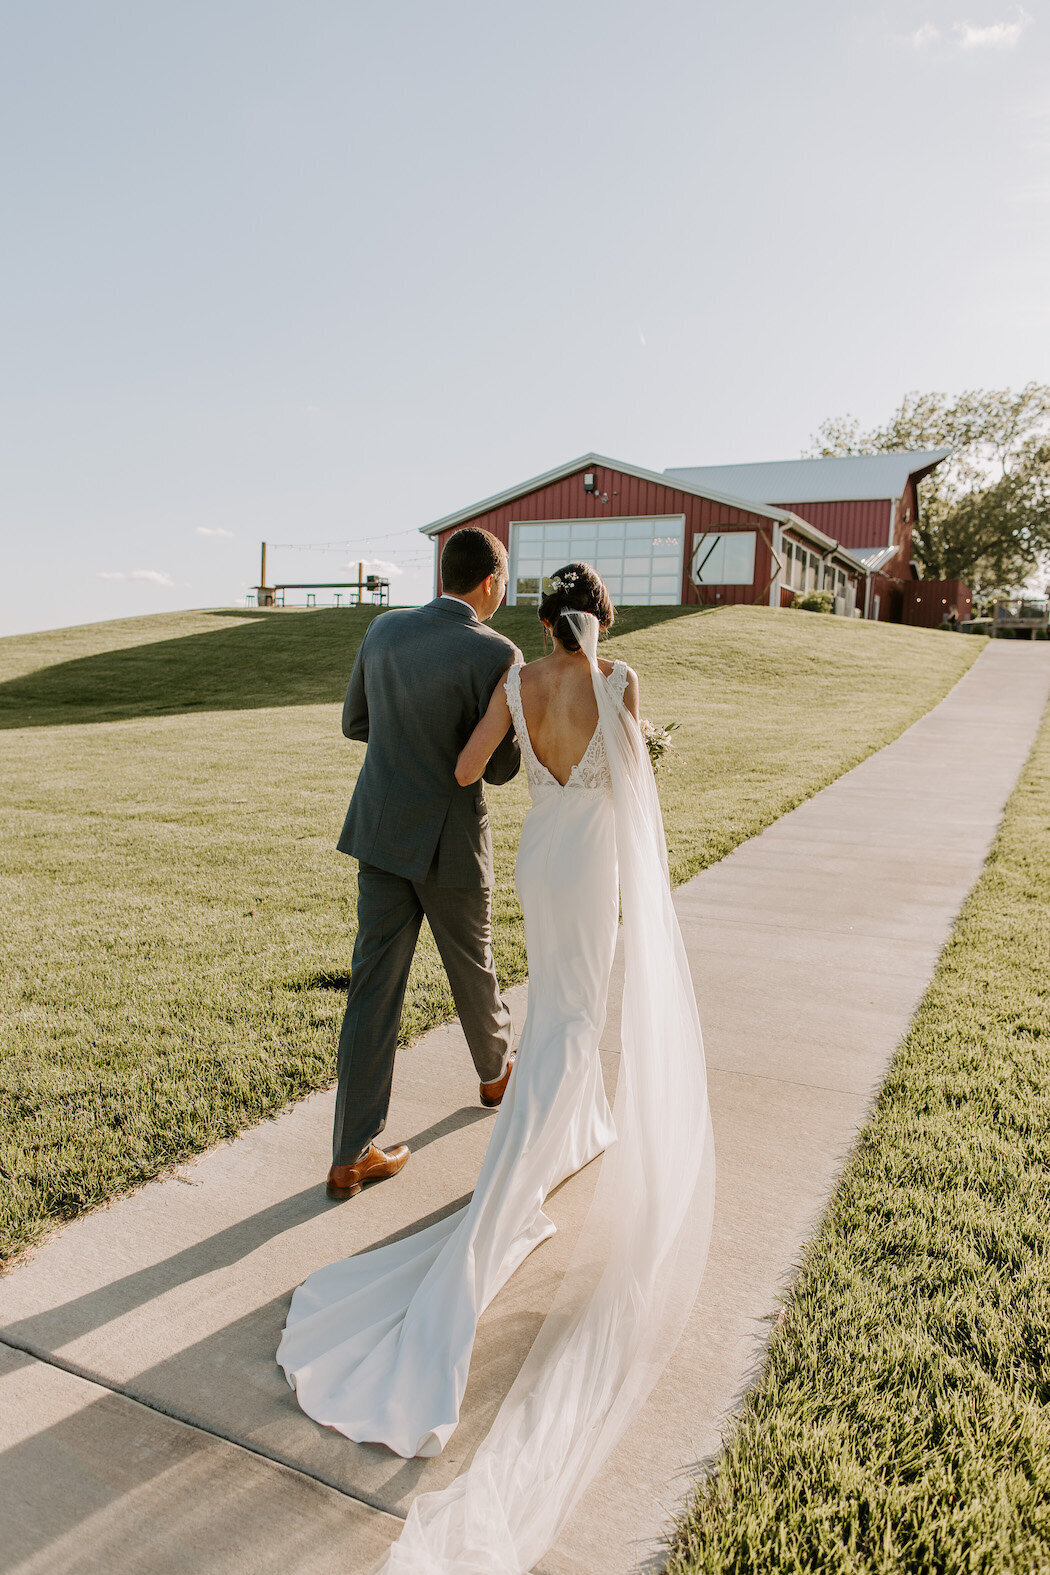 Lust for Life Event Planning and Wedding Design - Lauren and Logan Sparks Barn -18